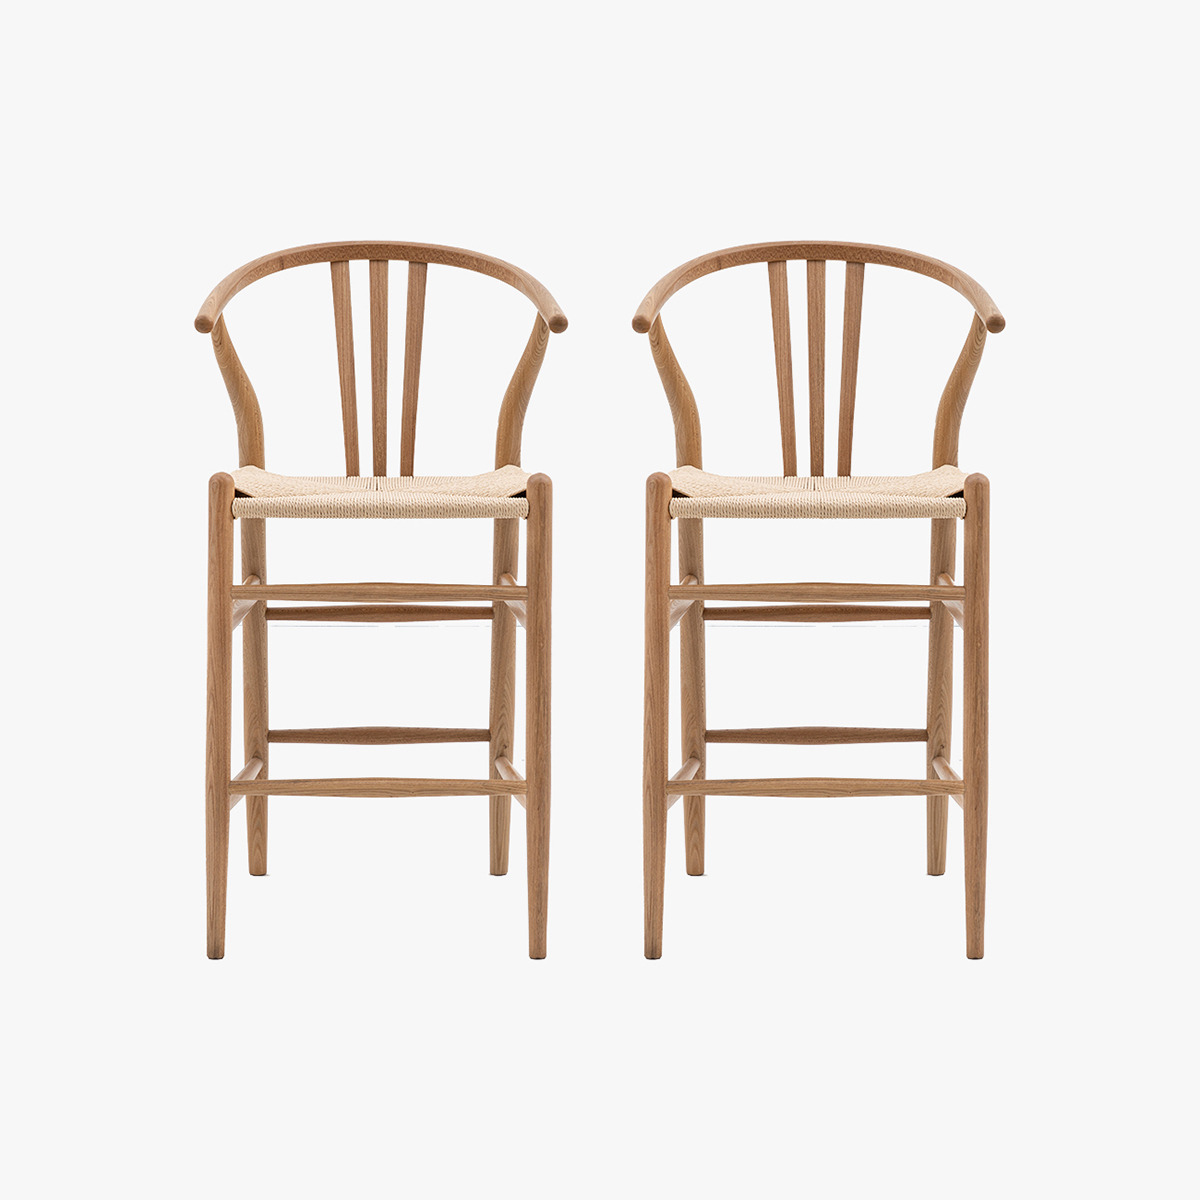 Maeve Bar Stool in Natural - Set of 2